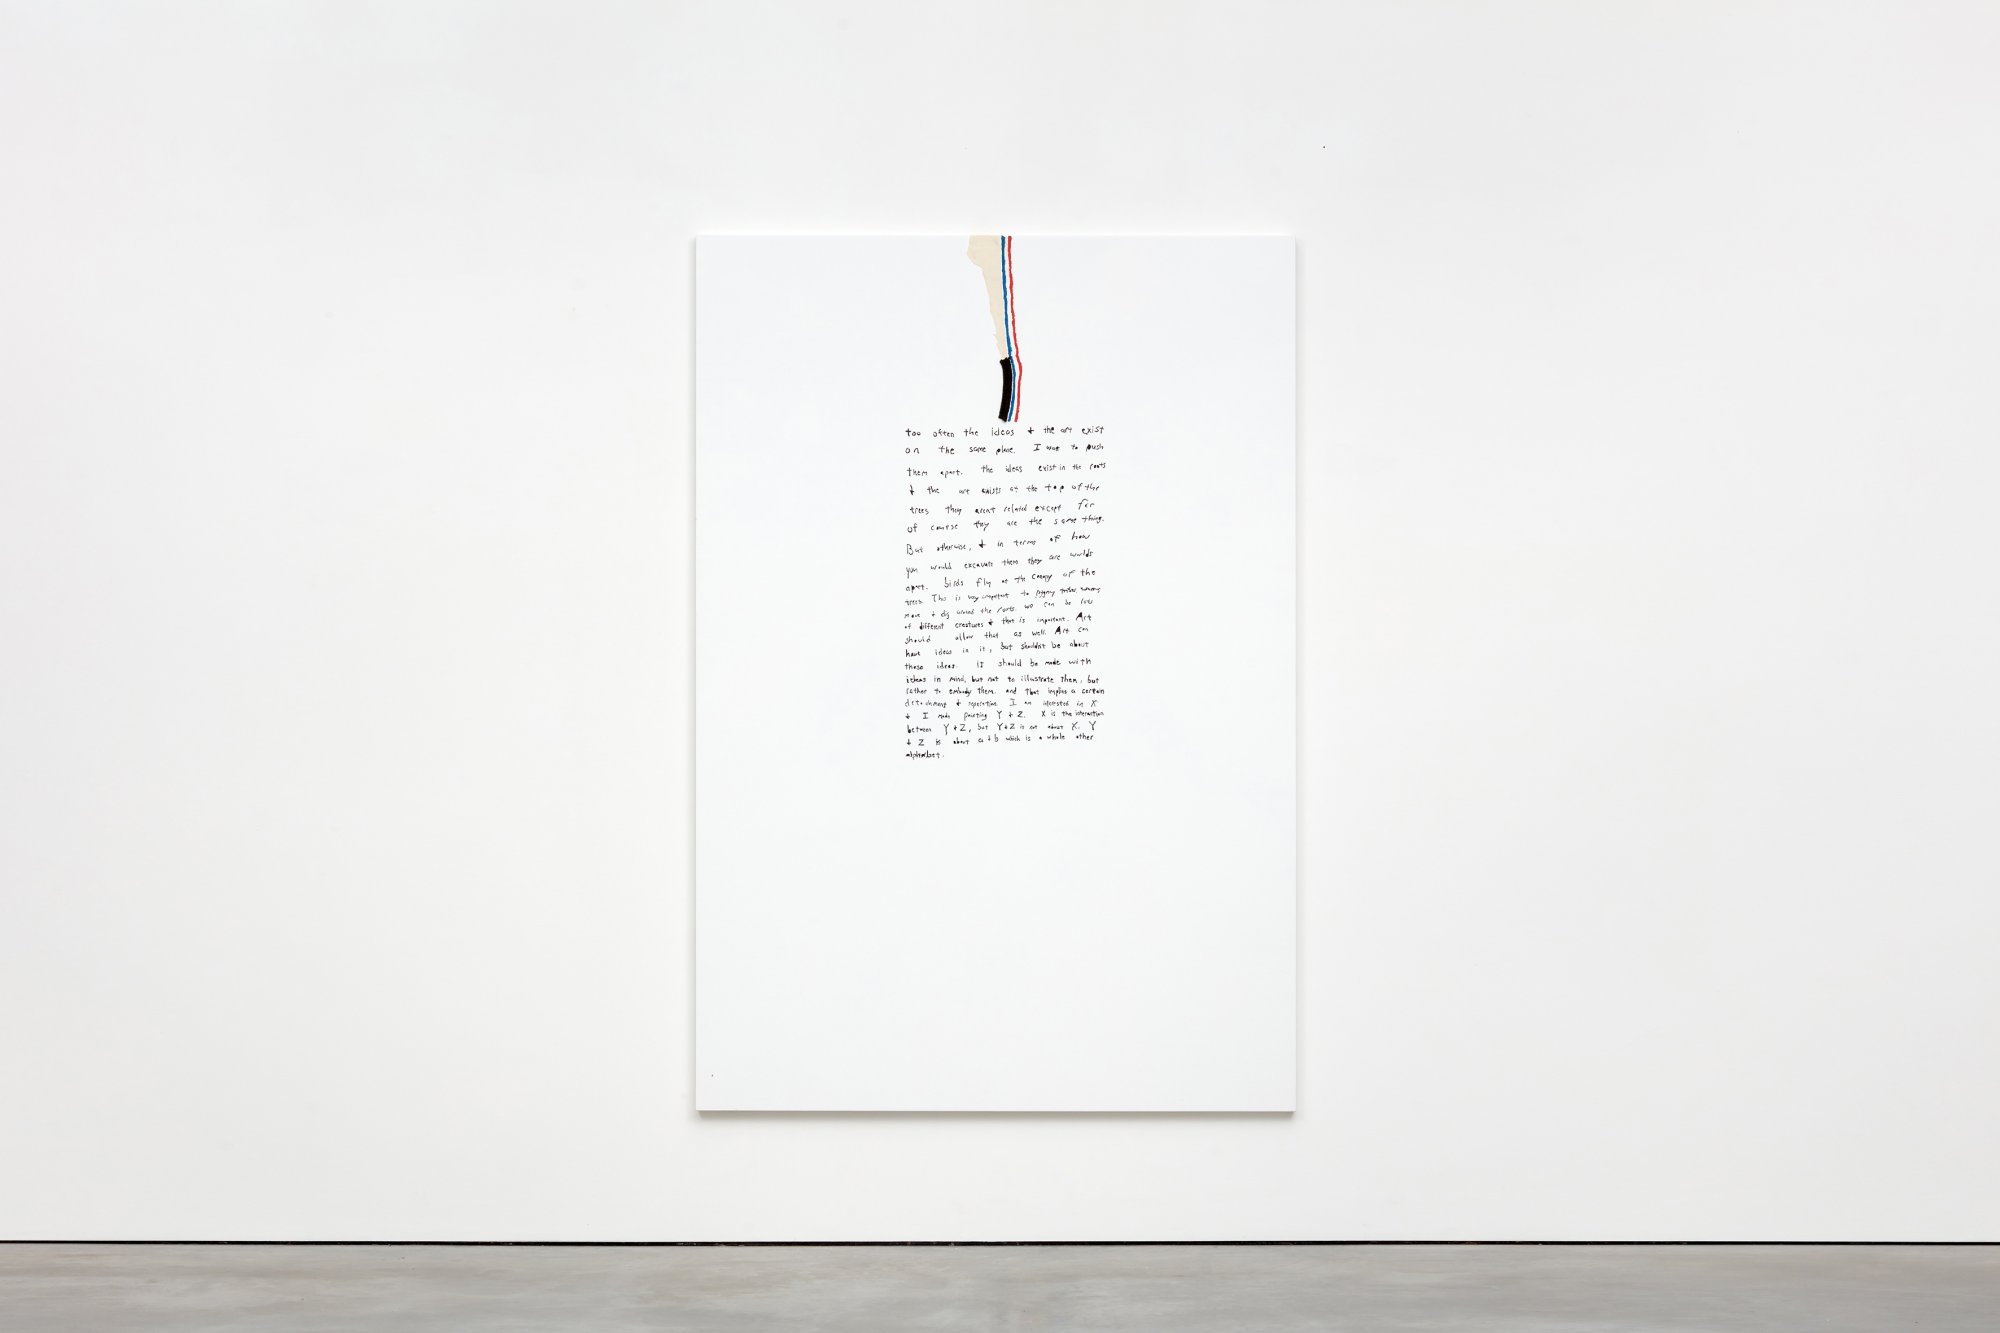 Richard Aldrich, Too often the art and ideas exist on the same plane, 2018 (text 2006)